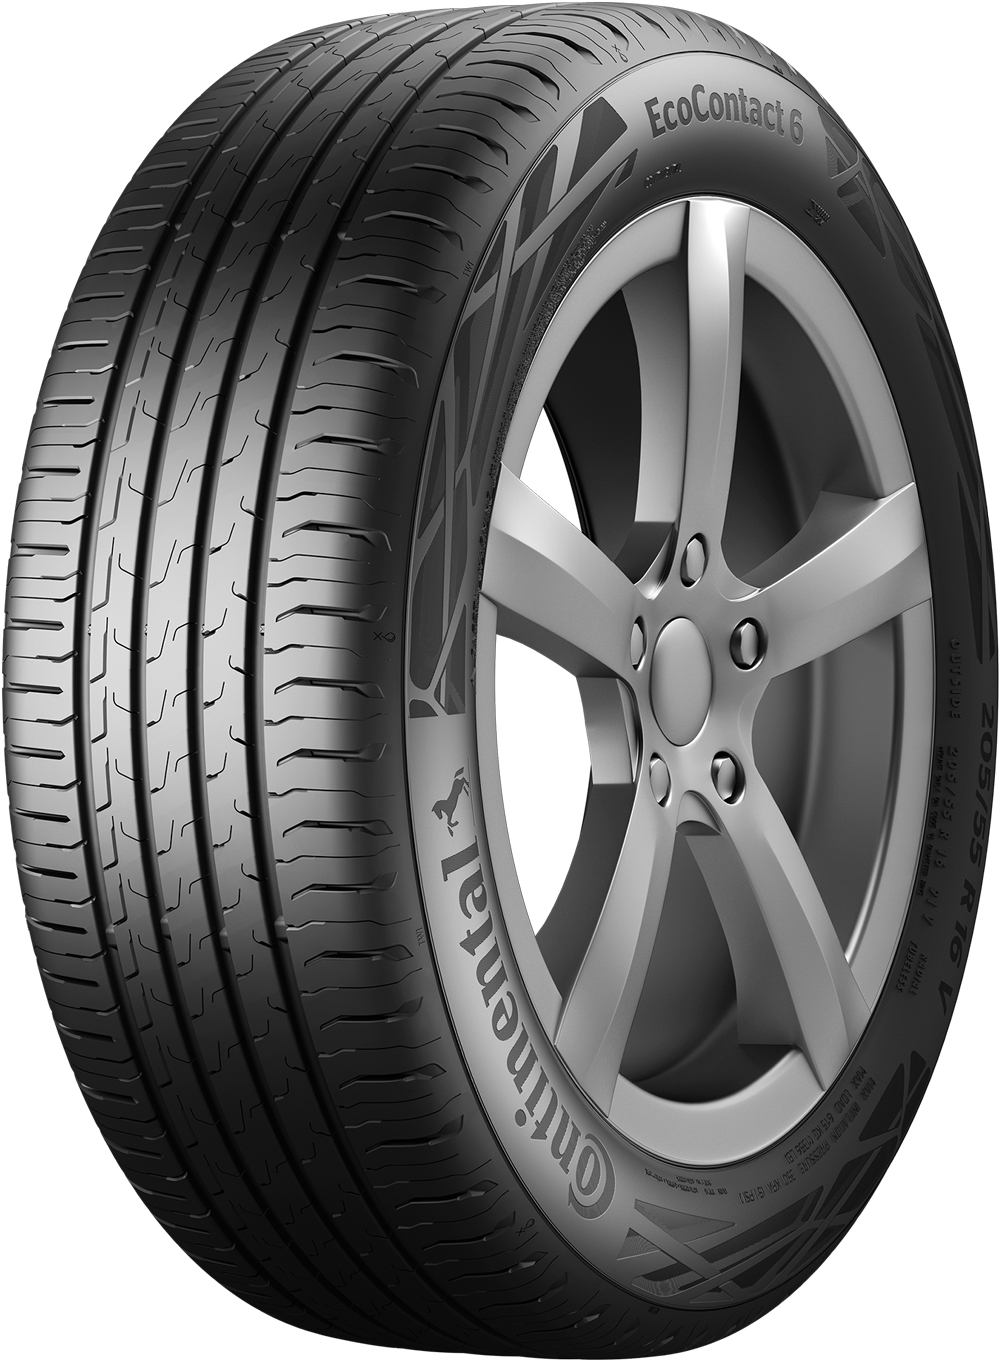 Anvelope auto CONTINENTAL ECO6XL XL 185/60 R15 88H